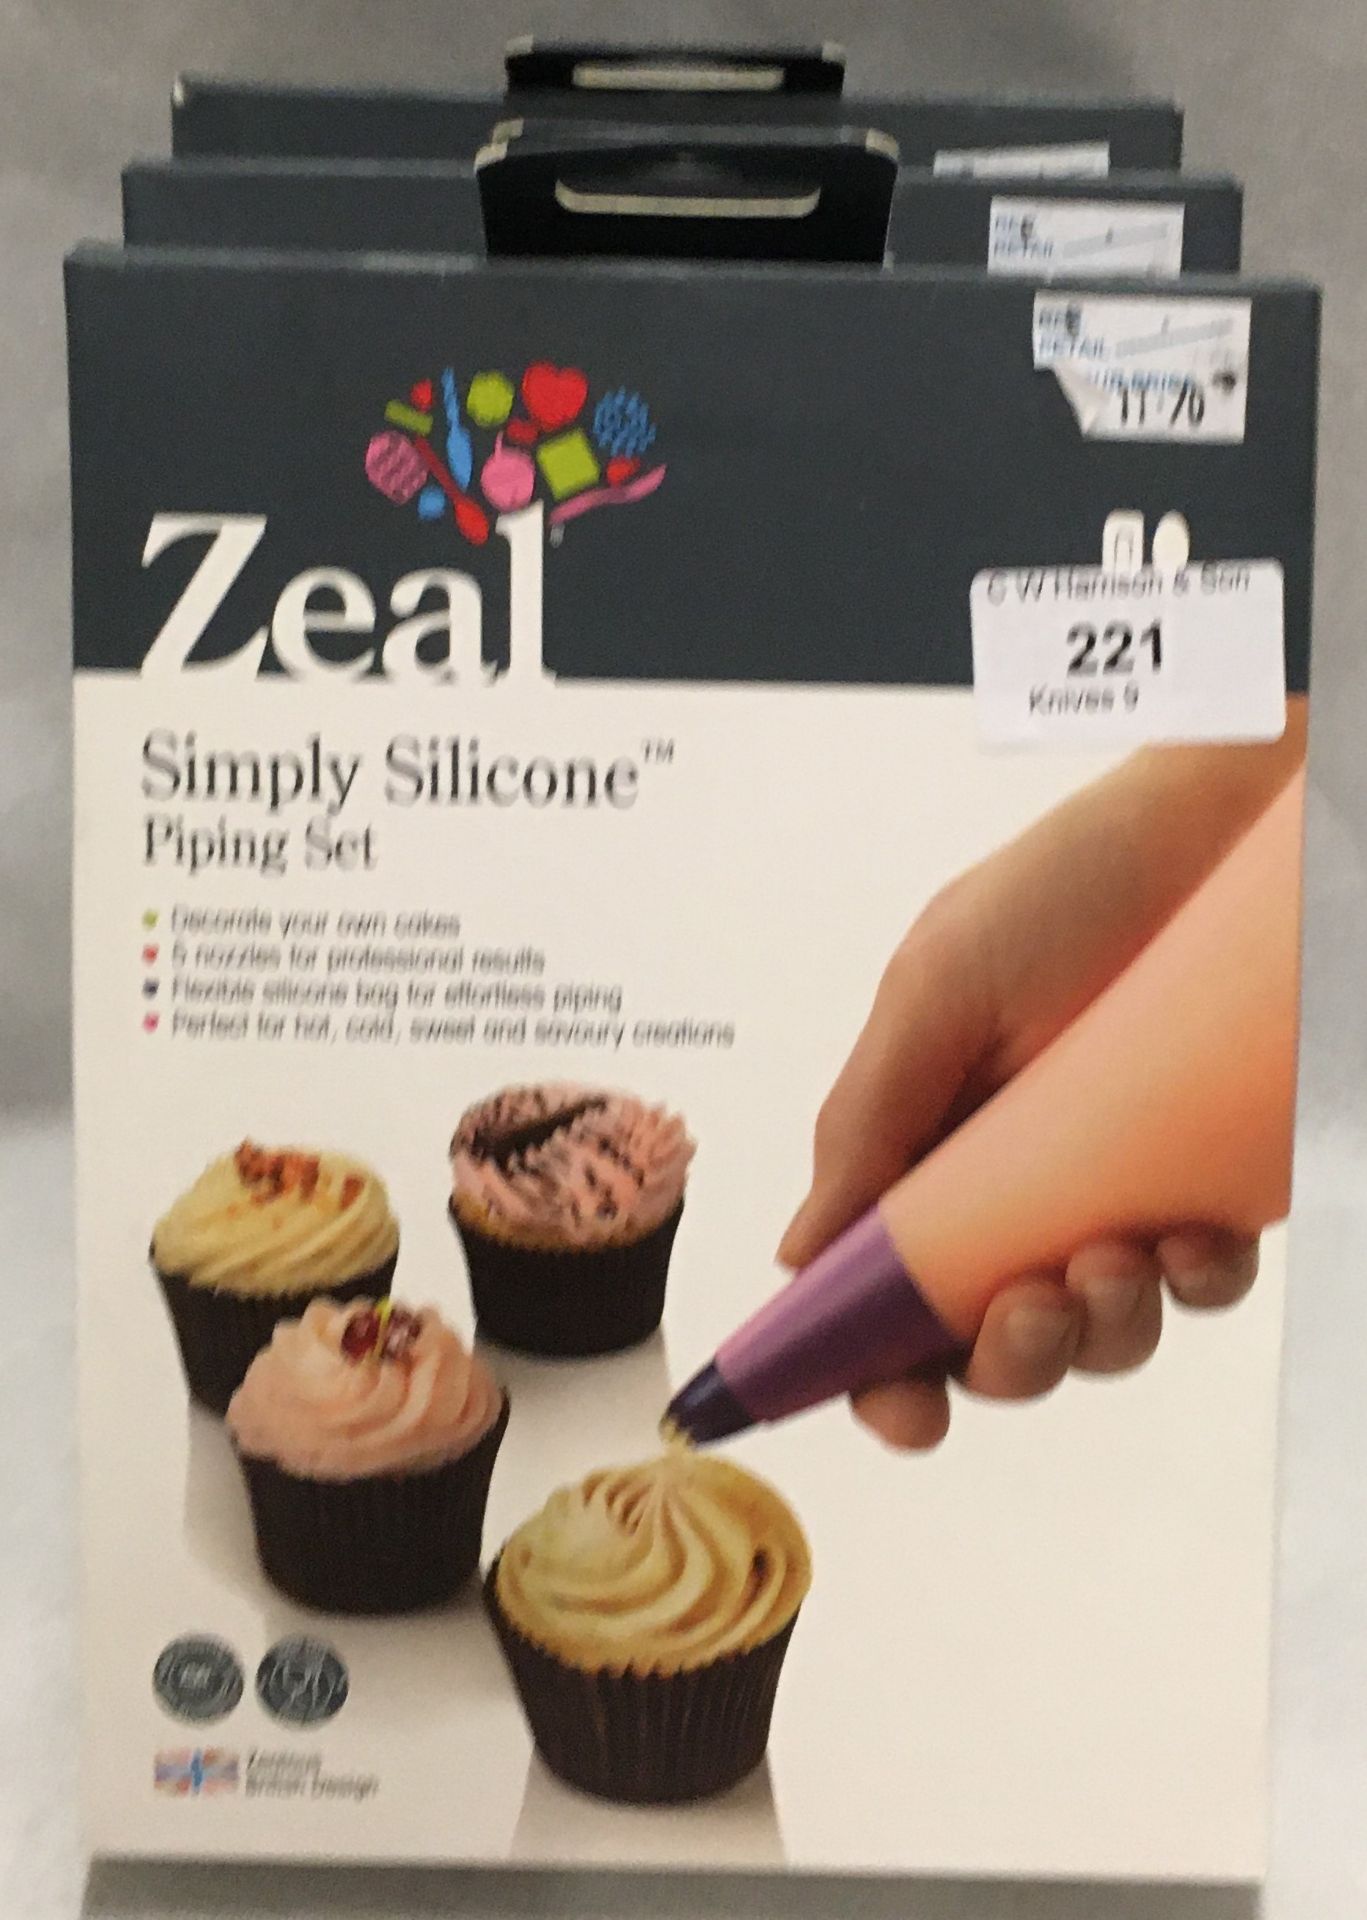 9 x Zeal silicone piping sets RRP £11.70